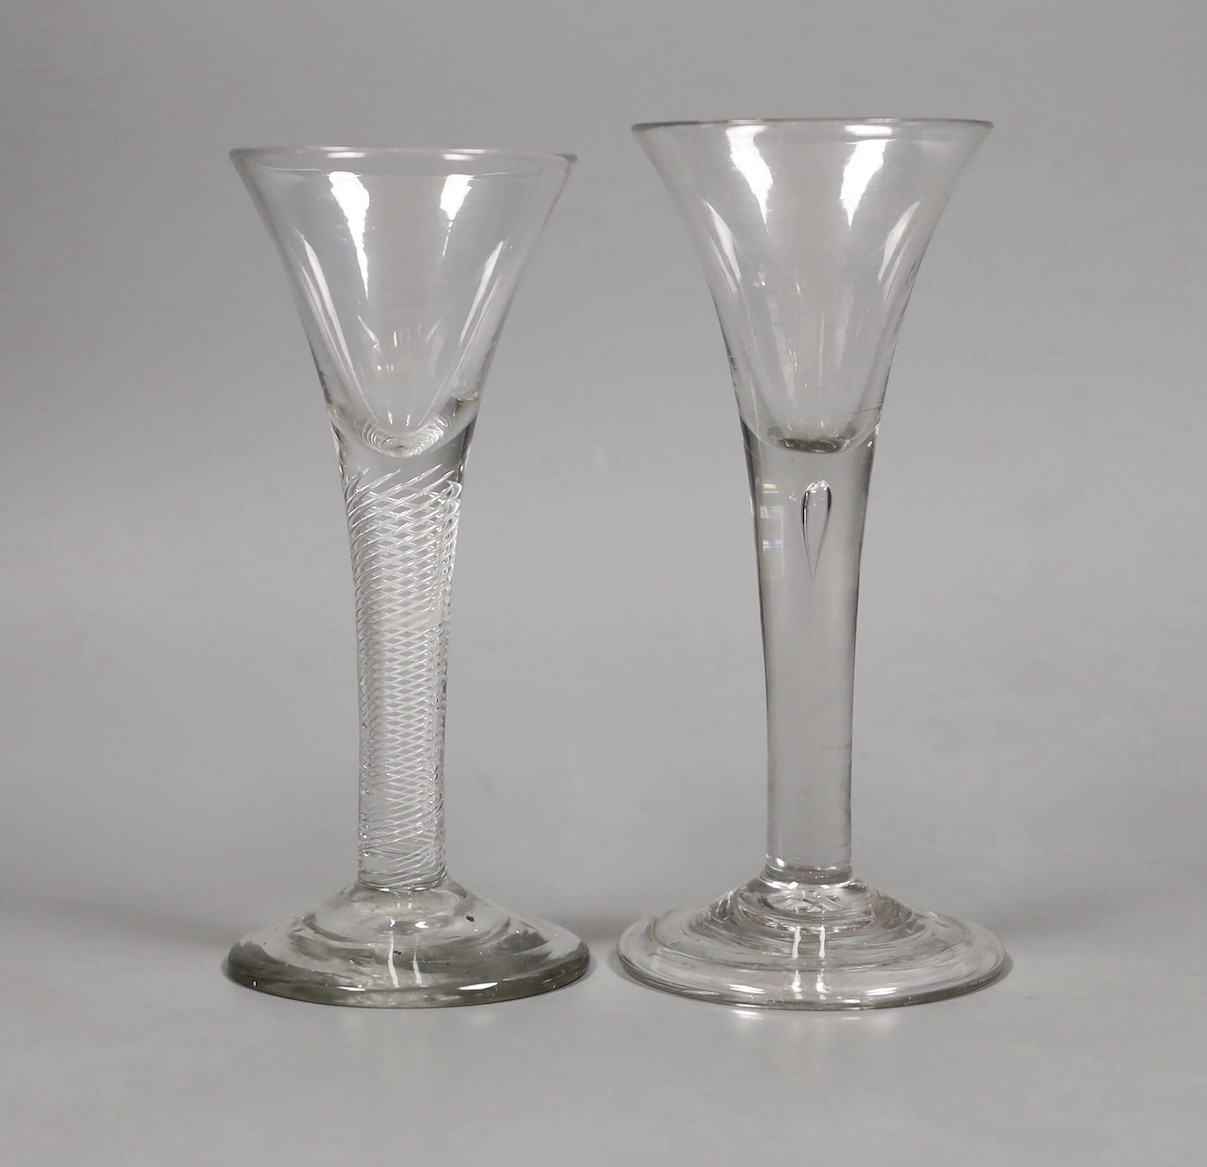 Two 18th century drawn trumpet wine glasses, one with air twist stem, tallest 15.5cm